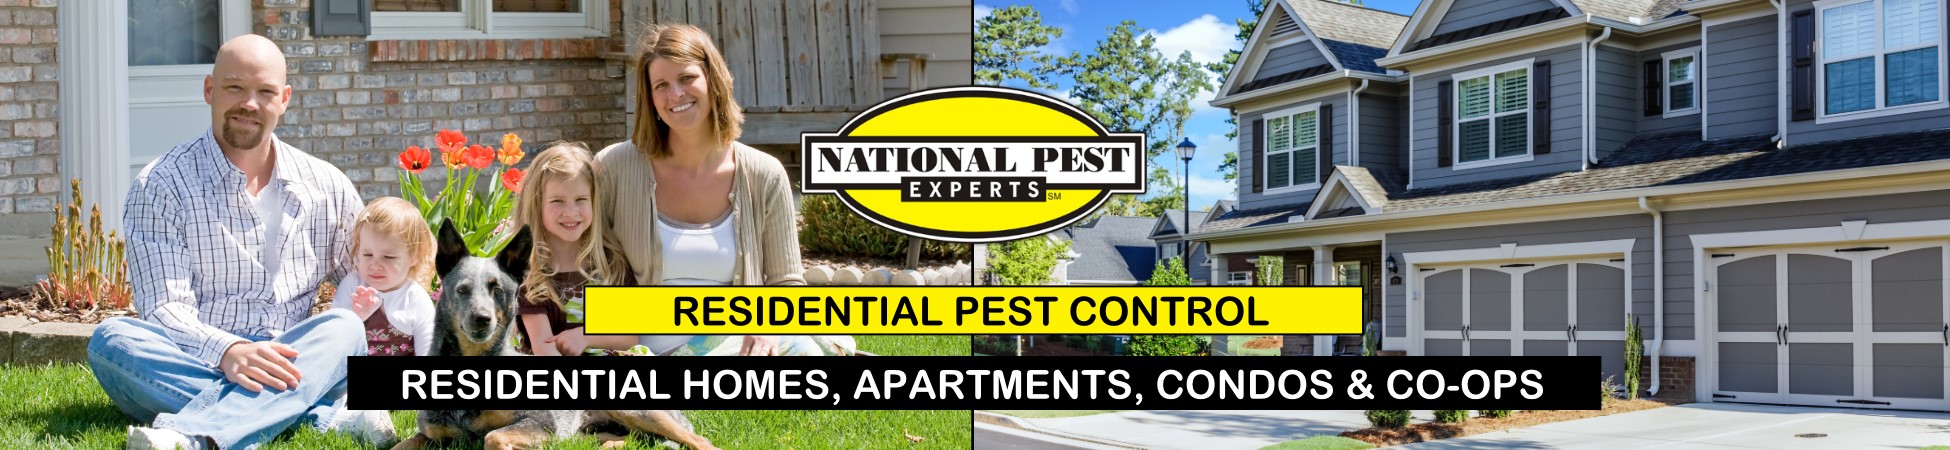 National Pest Experts - Residential exterminating and pest control in Huntington, NY